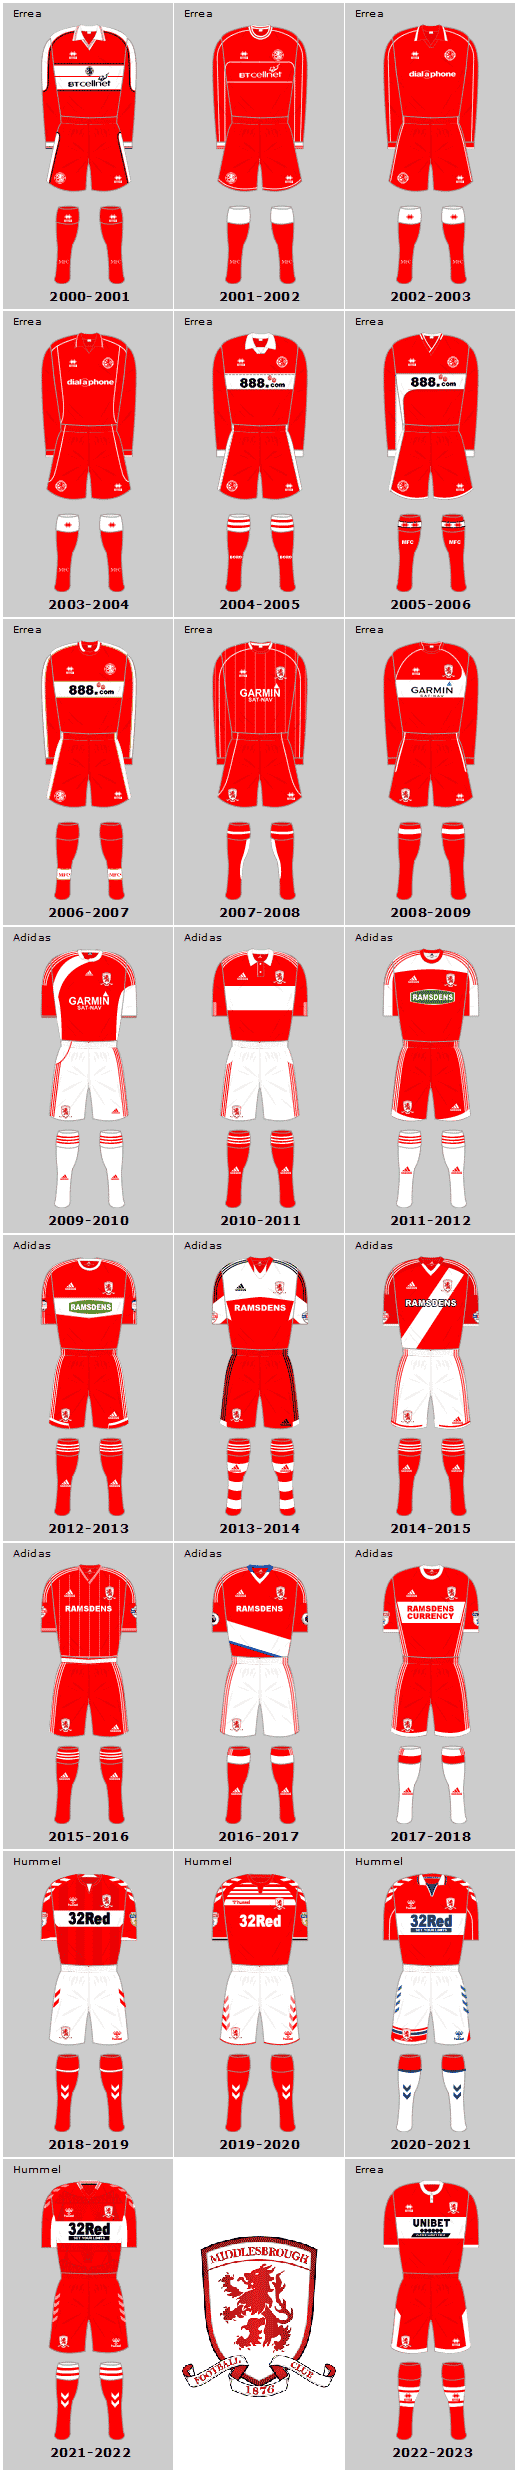 Middlesbrough FC 21st Century Home Playing Kits